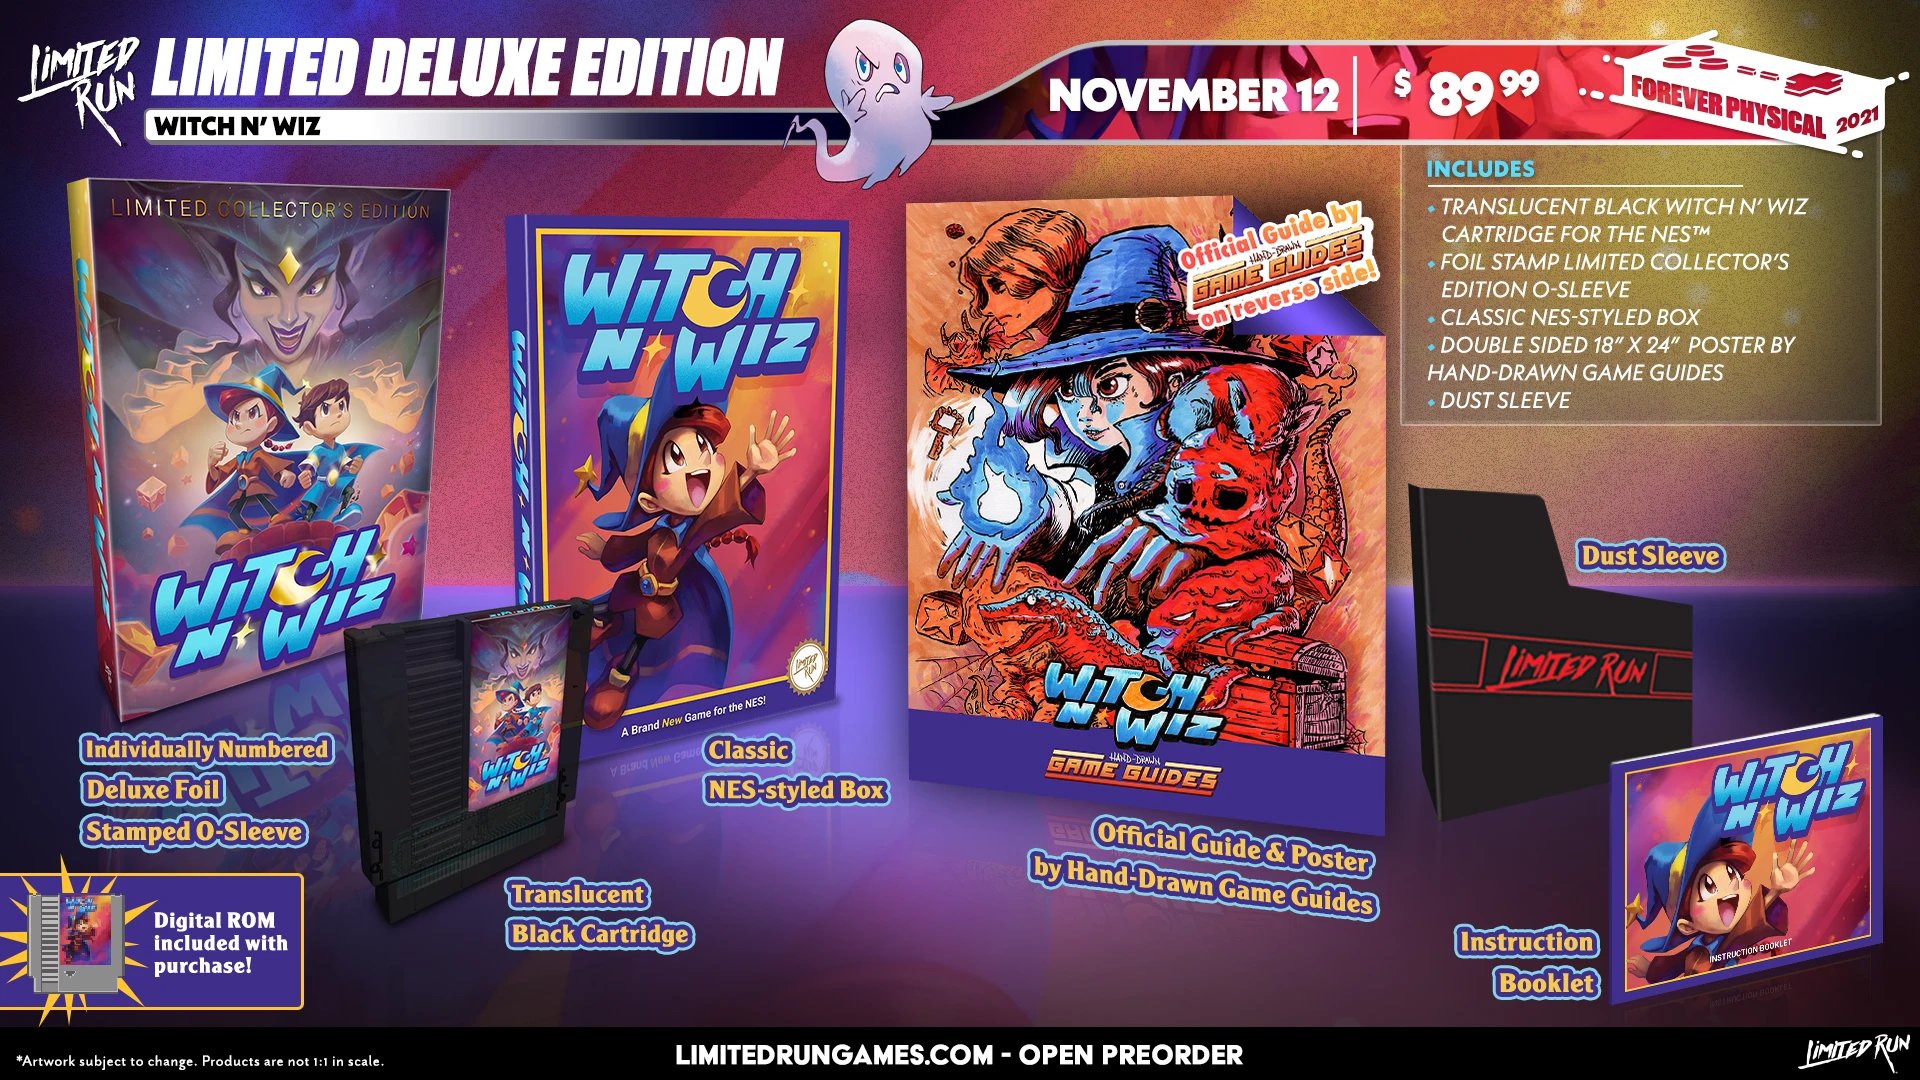 Marketing image shows Witch n' Wiz physical Deluxe version and preorders open November 12th at limitedrungames.com. Image shows prices of $89.99. Includes Individually numbered deluxe foil stamped o-sleeve, translucent black cartridge, classic nes-styled box, official guide & poster by hand drawn game guides, dust sleeve, and instruction booklet.